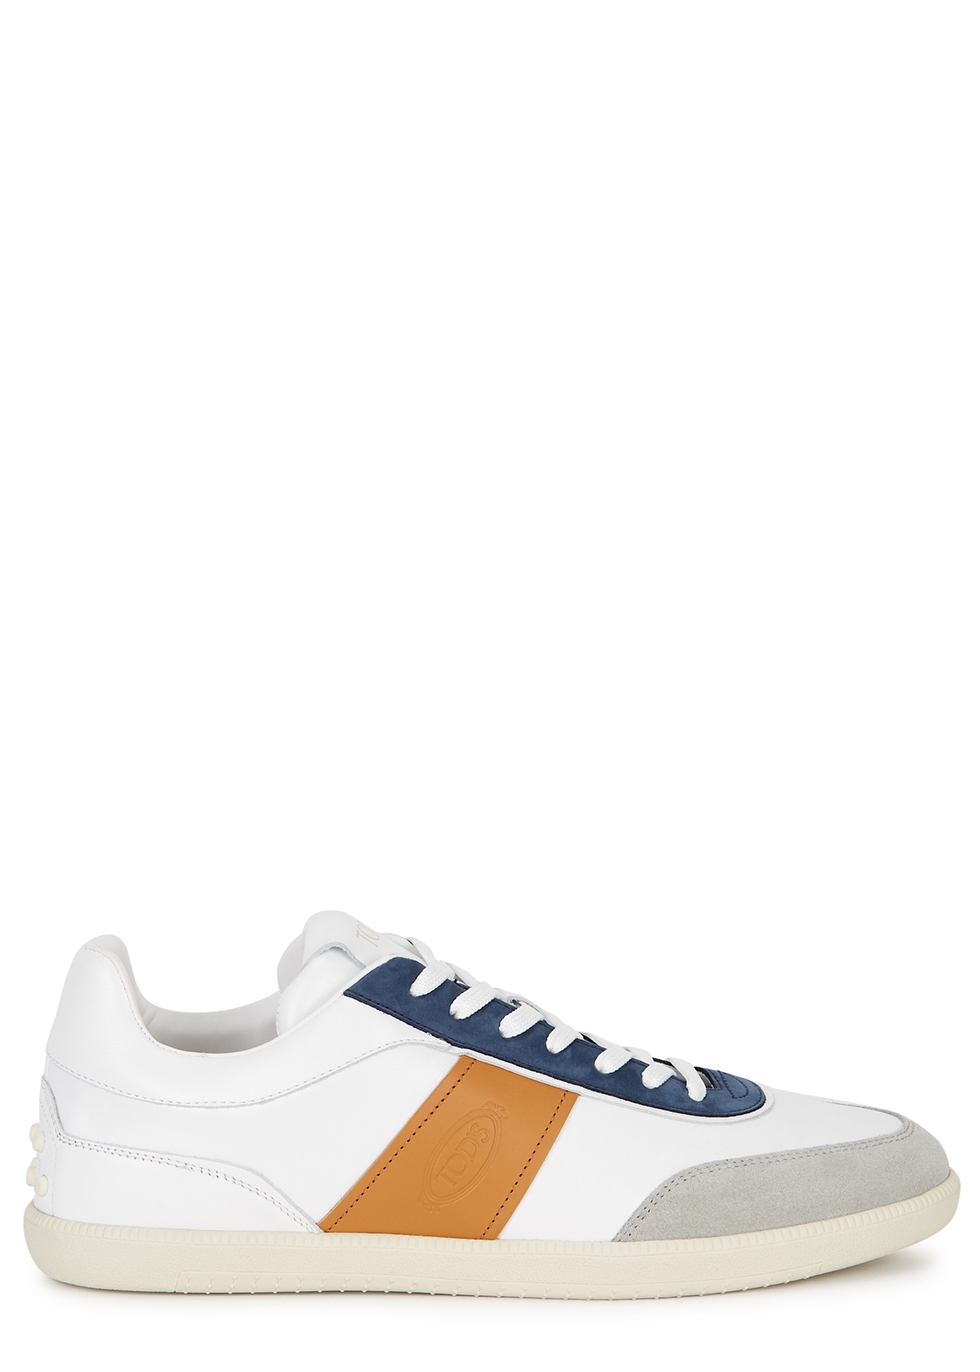 tods white sneakers